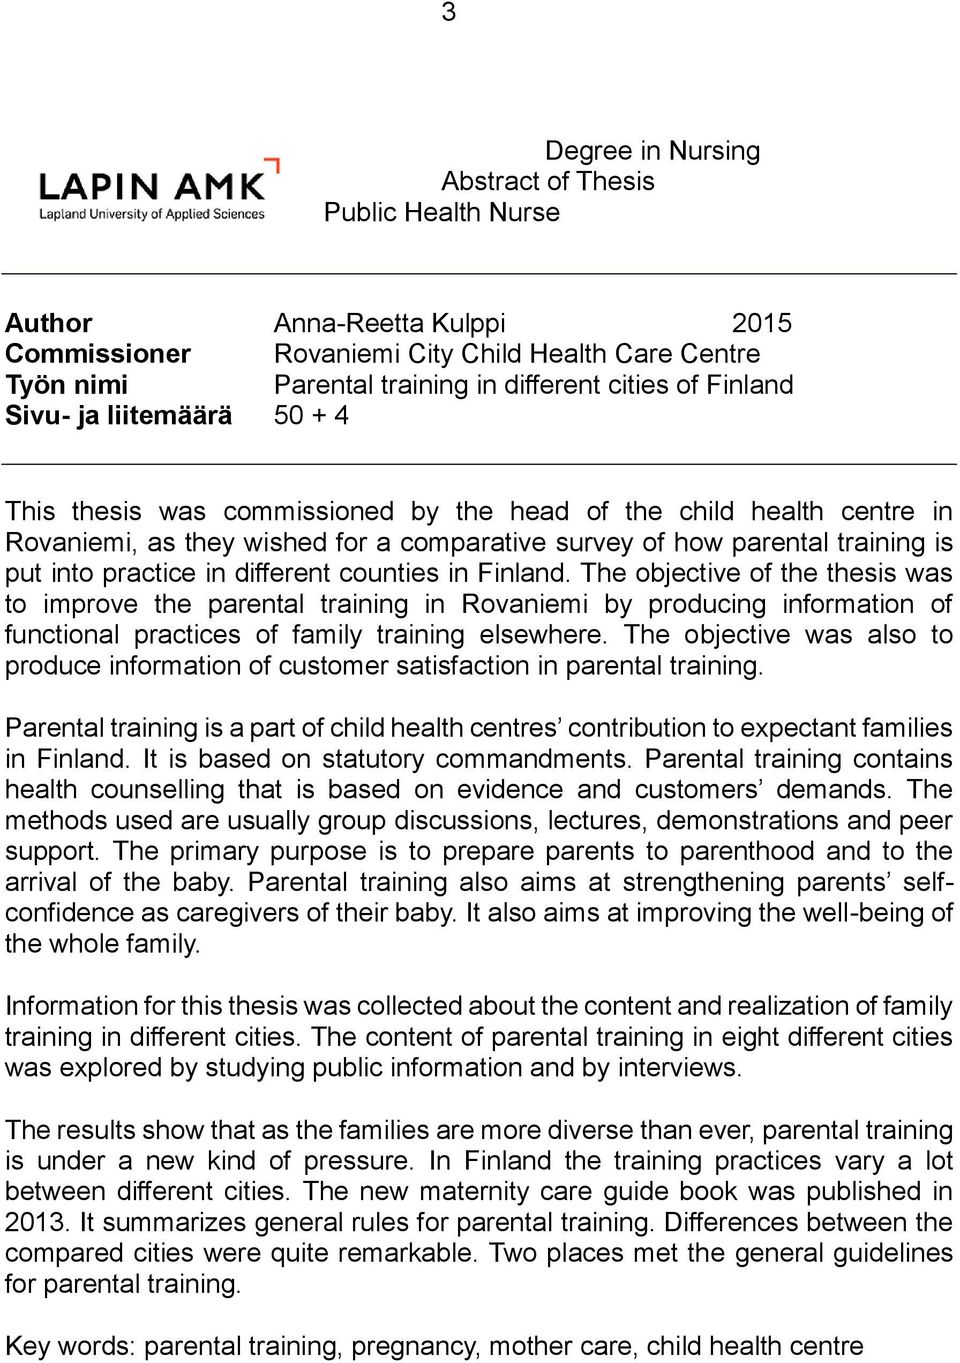 practice in different counties in Finland. The objective of the thesis was to improve the parental training in Rovaniemi by producing information of functional practices of family training elsewhere.